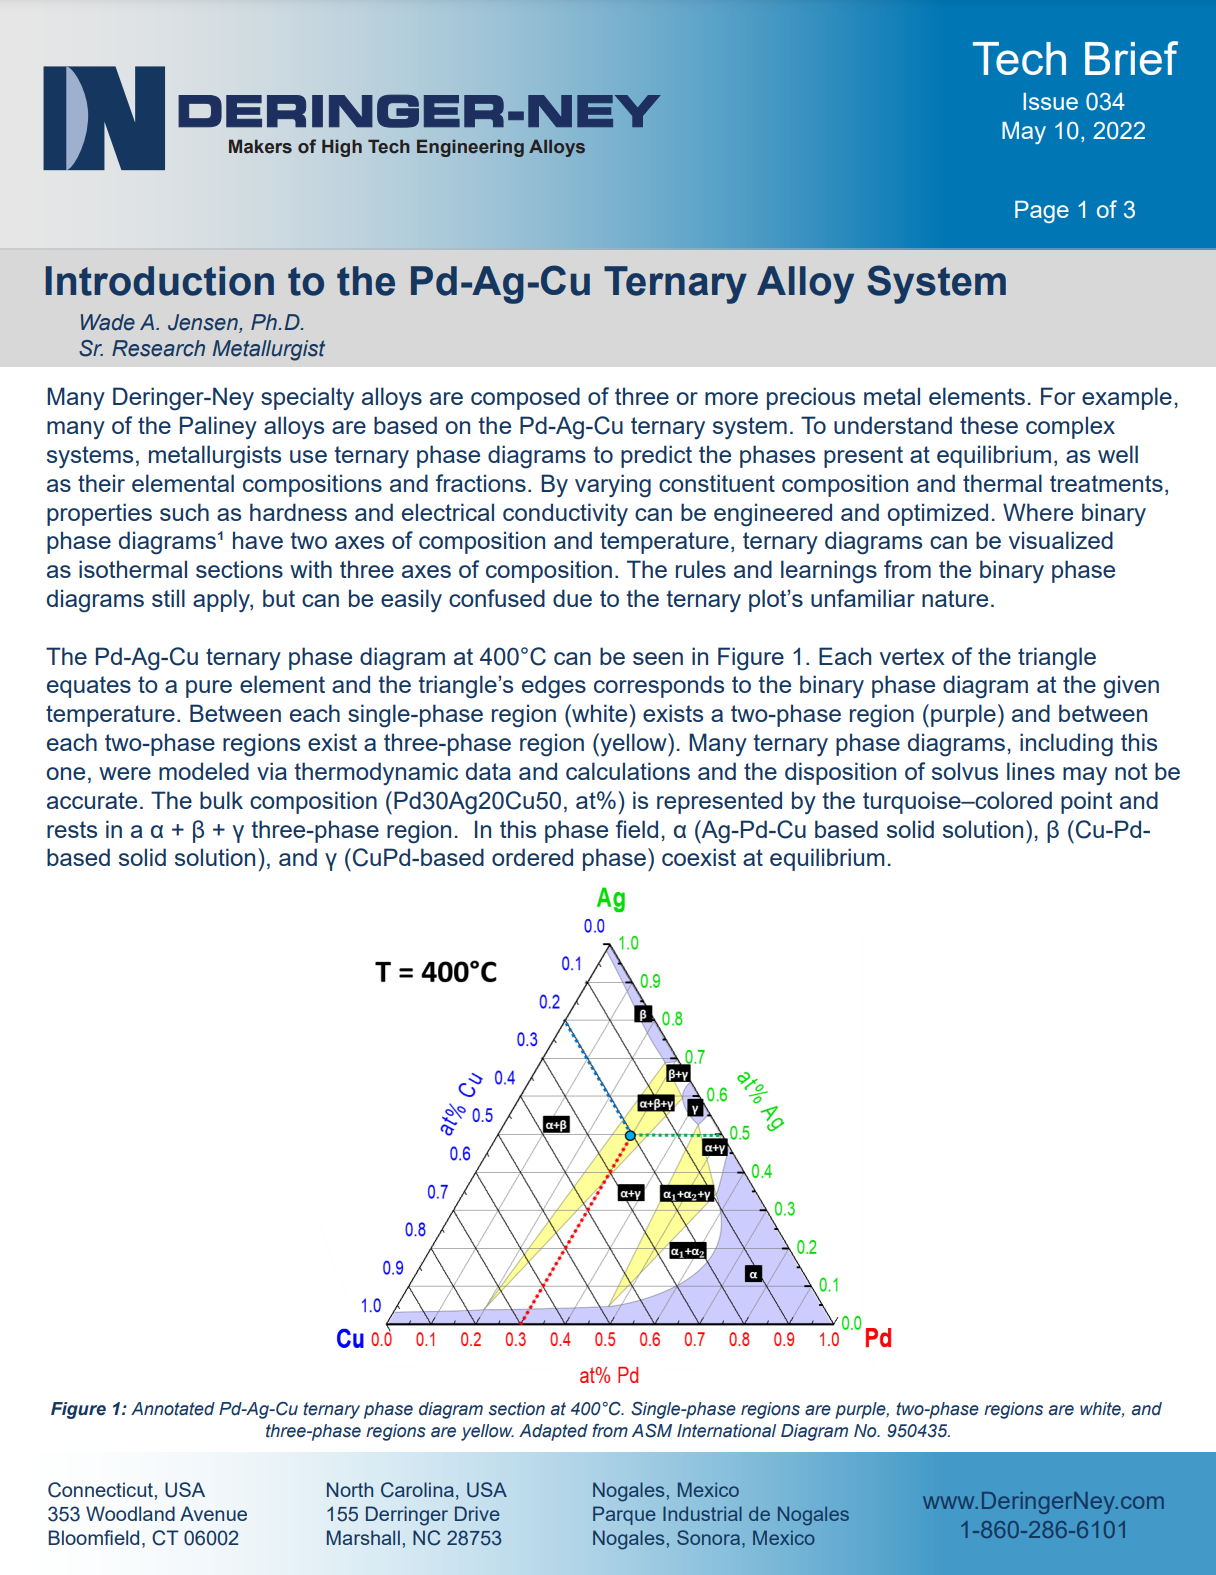 Introduction to the Pd-Ag-Cu Ternary Alloy System - Deringer Ney